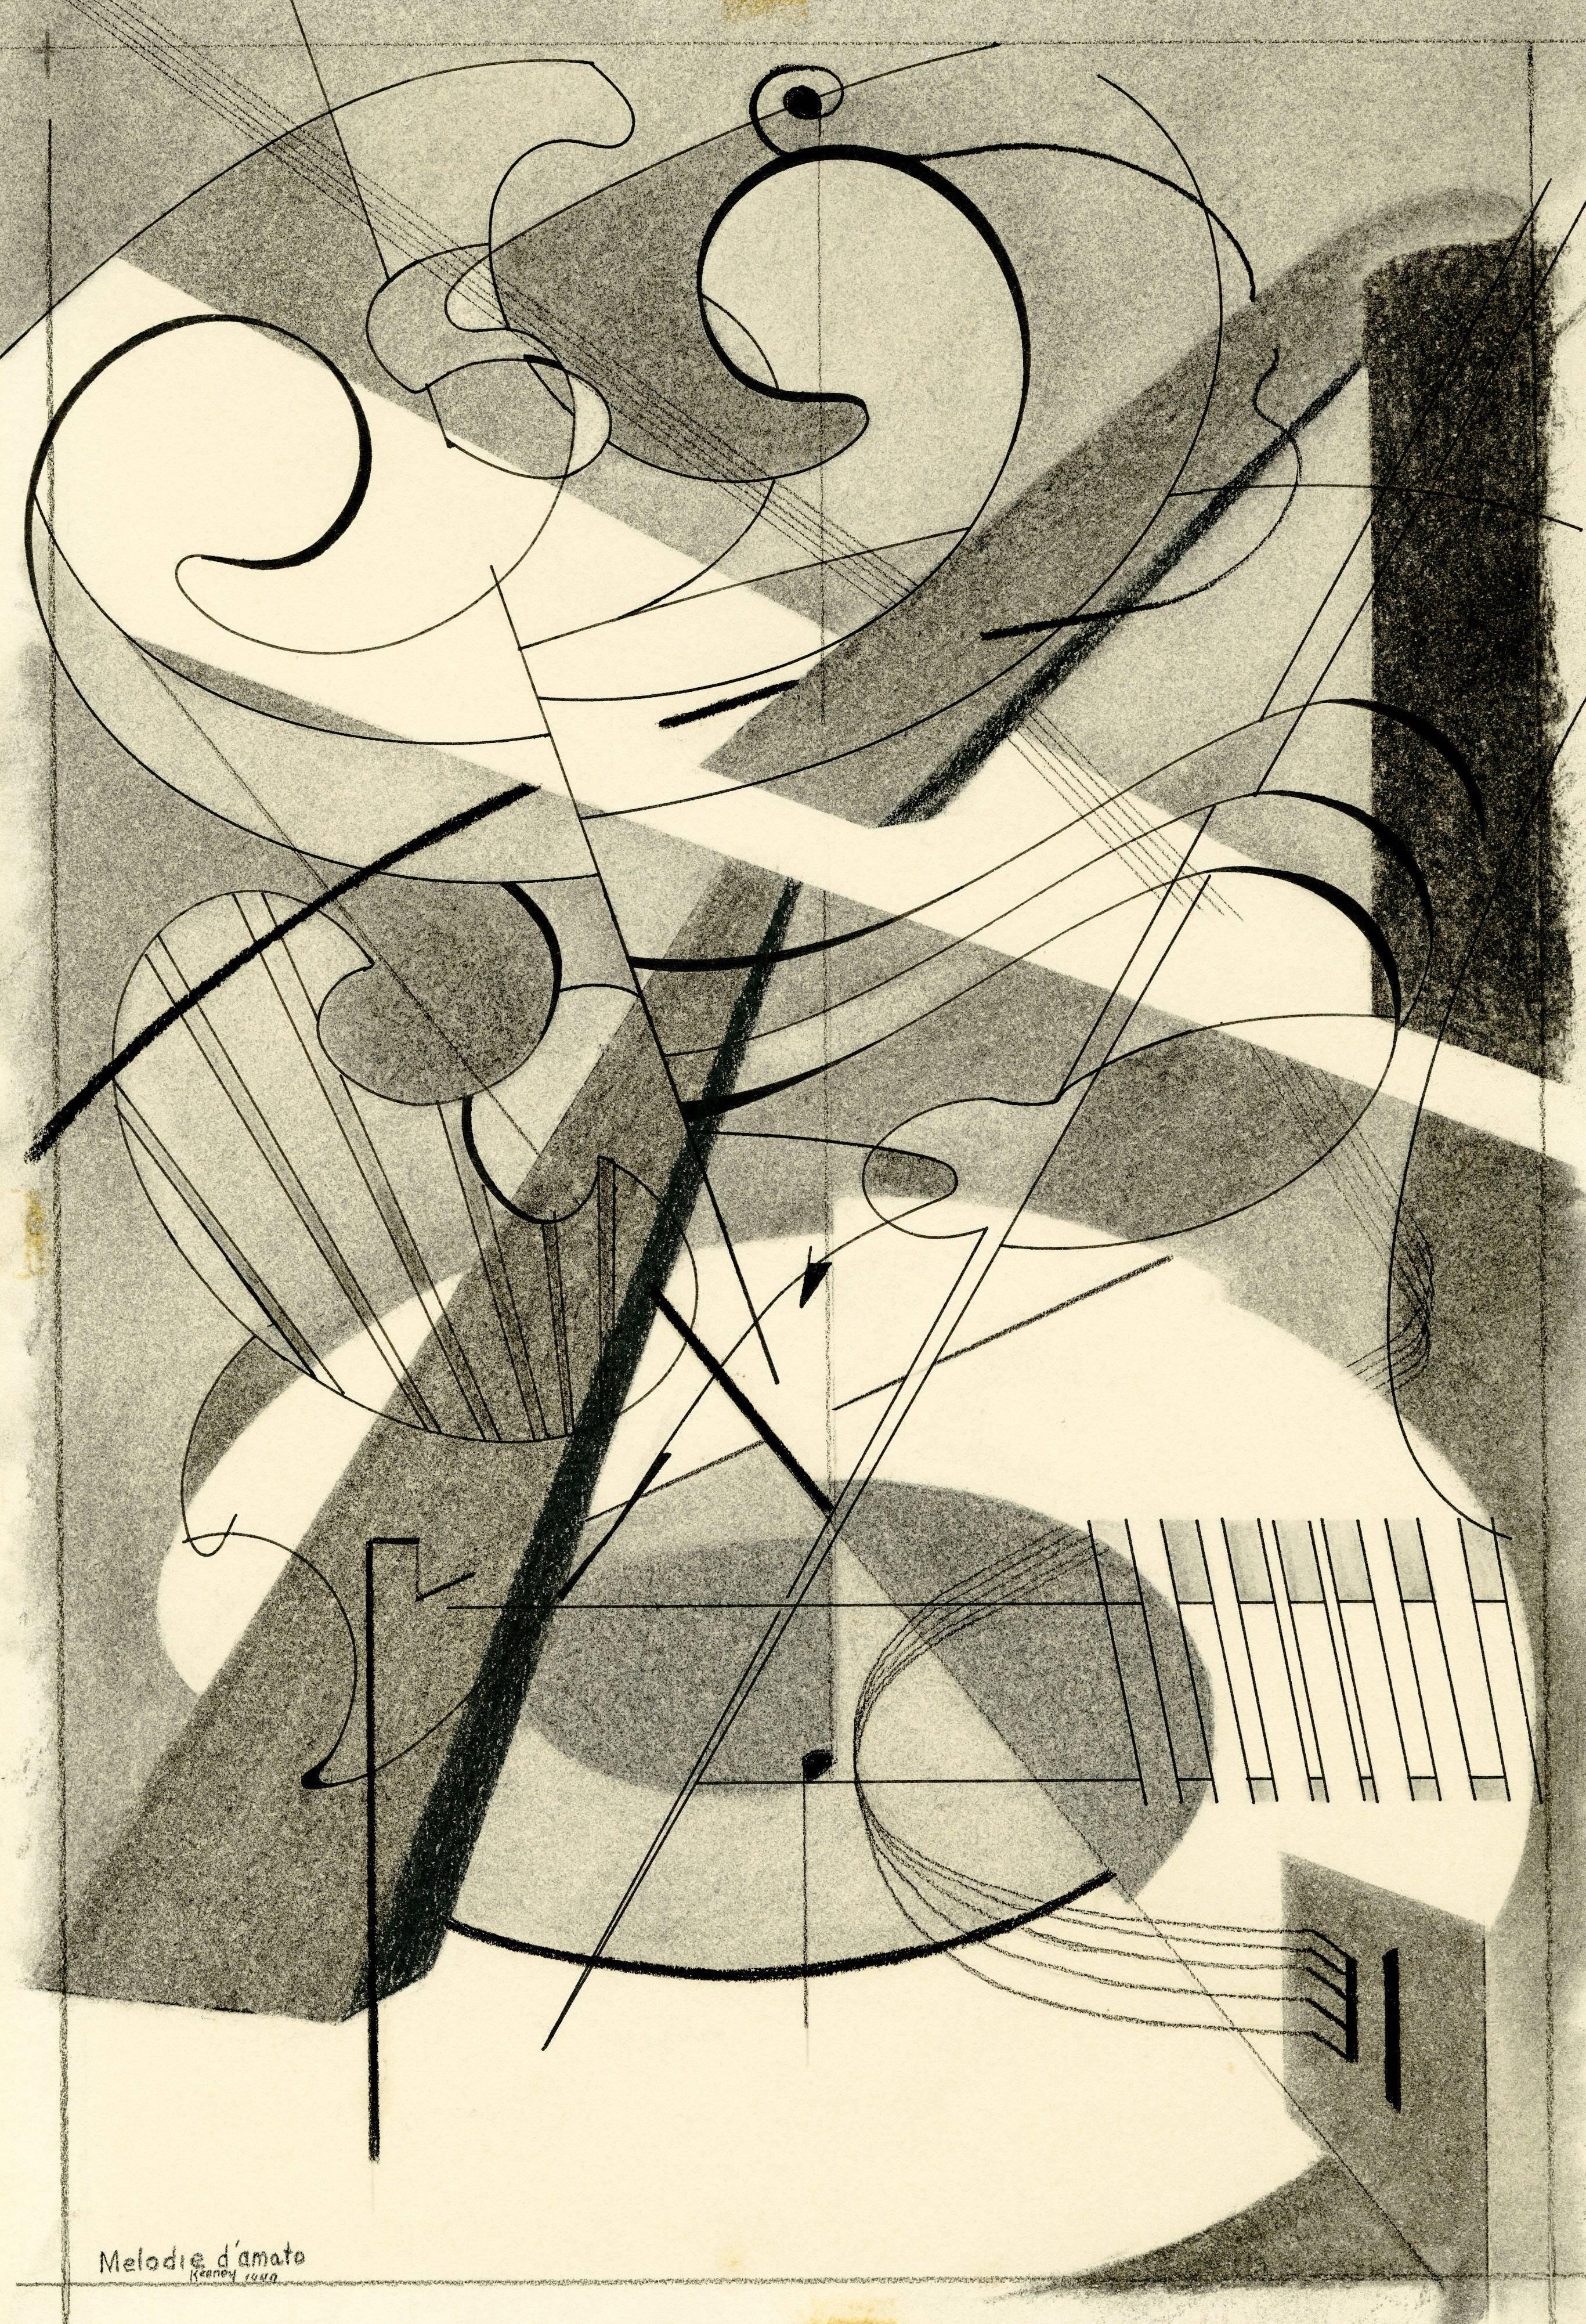 Leo Kenney Abstract Drawing - Melodie d’amato